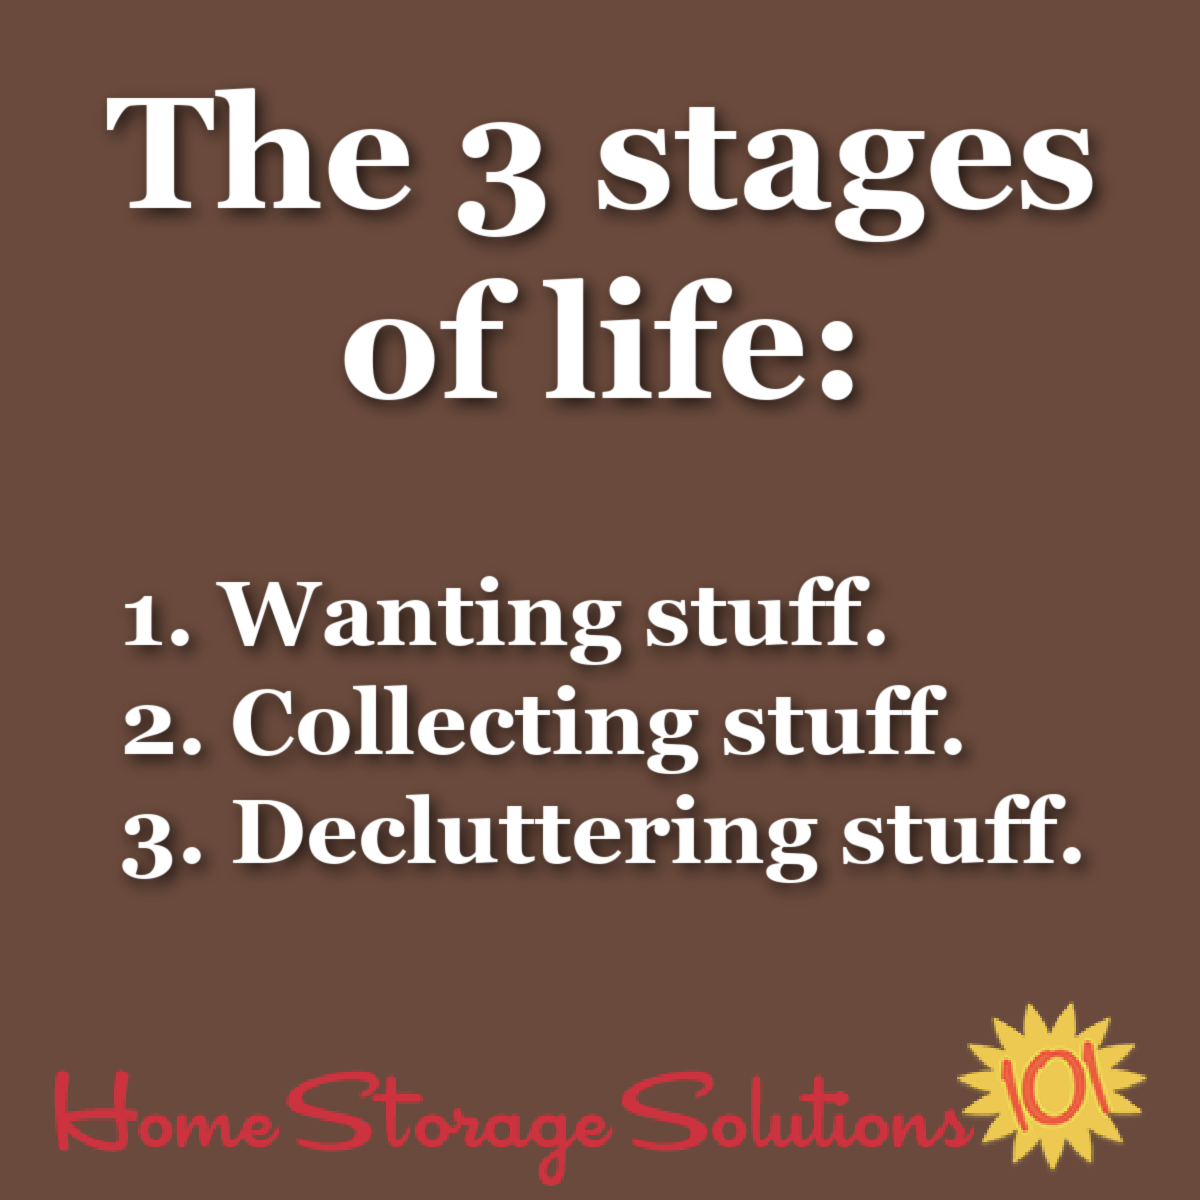 The 3 stages of life: 1. Wanting stuff. 2. Collecting stuff. 3. Decluttering stuff.